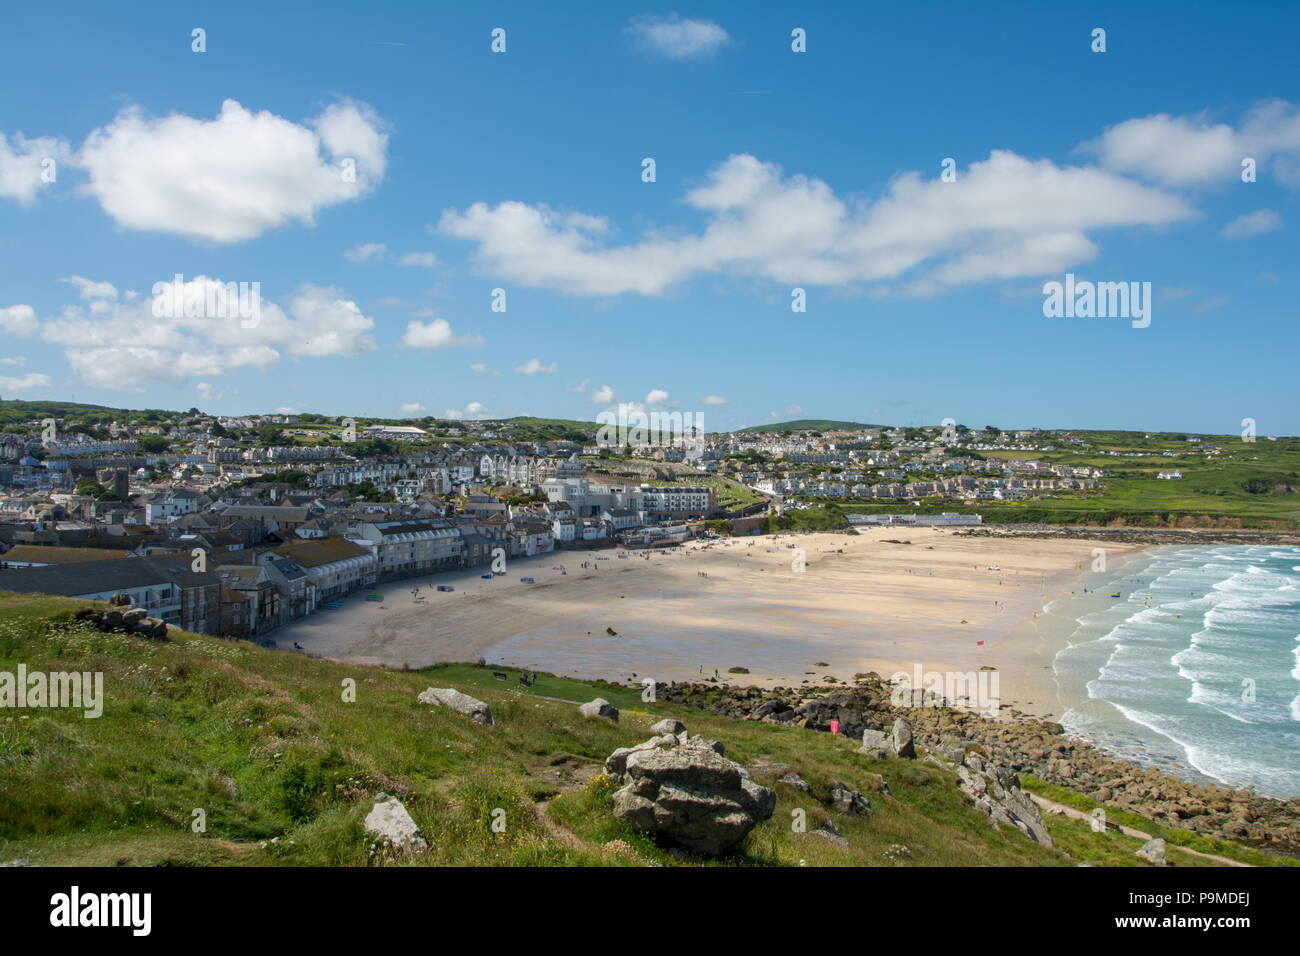 A view of Porthmeor beach from atop Island peninsula in St Ives, Cornwall, UK Stock Photo